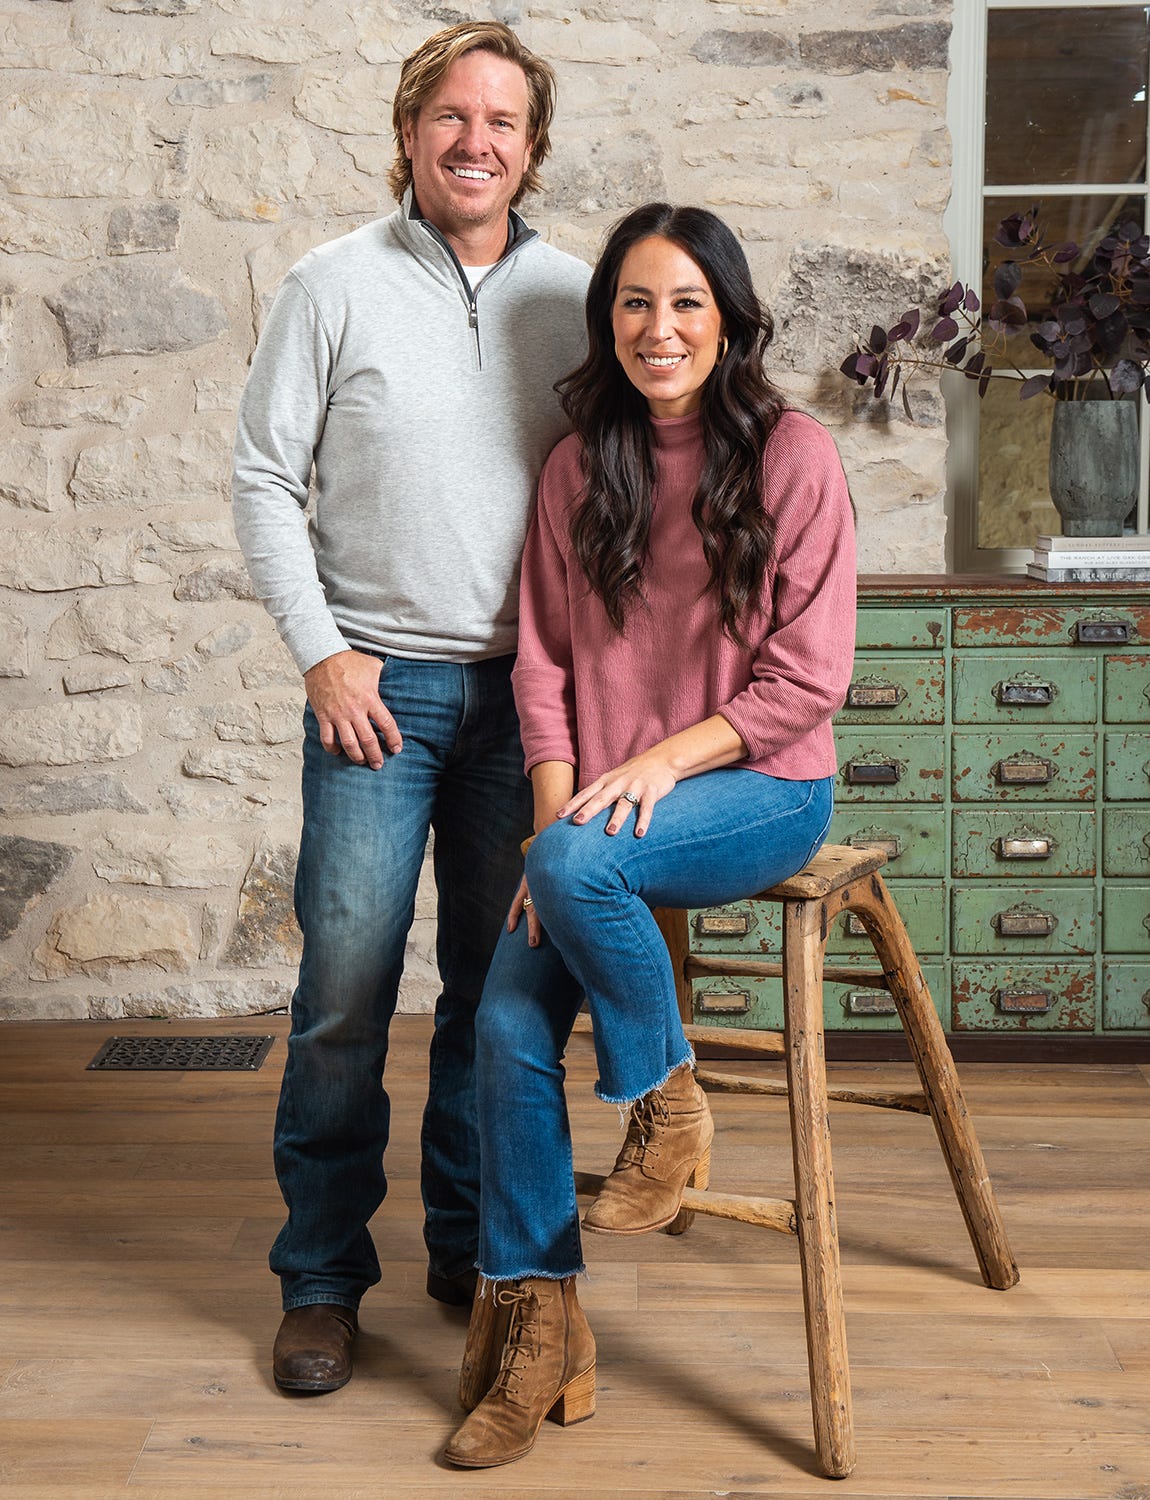 Chip and Joanna Gaines to Air Network Preview as Launch Postponed |  PEOPLE.com